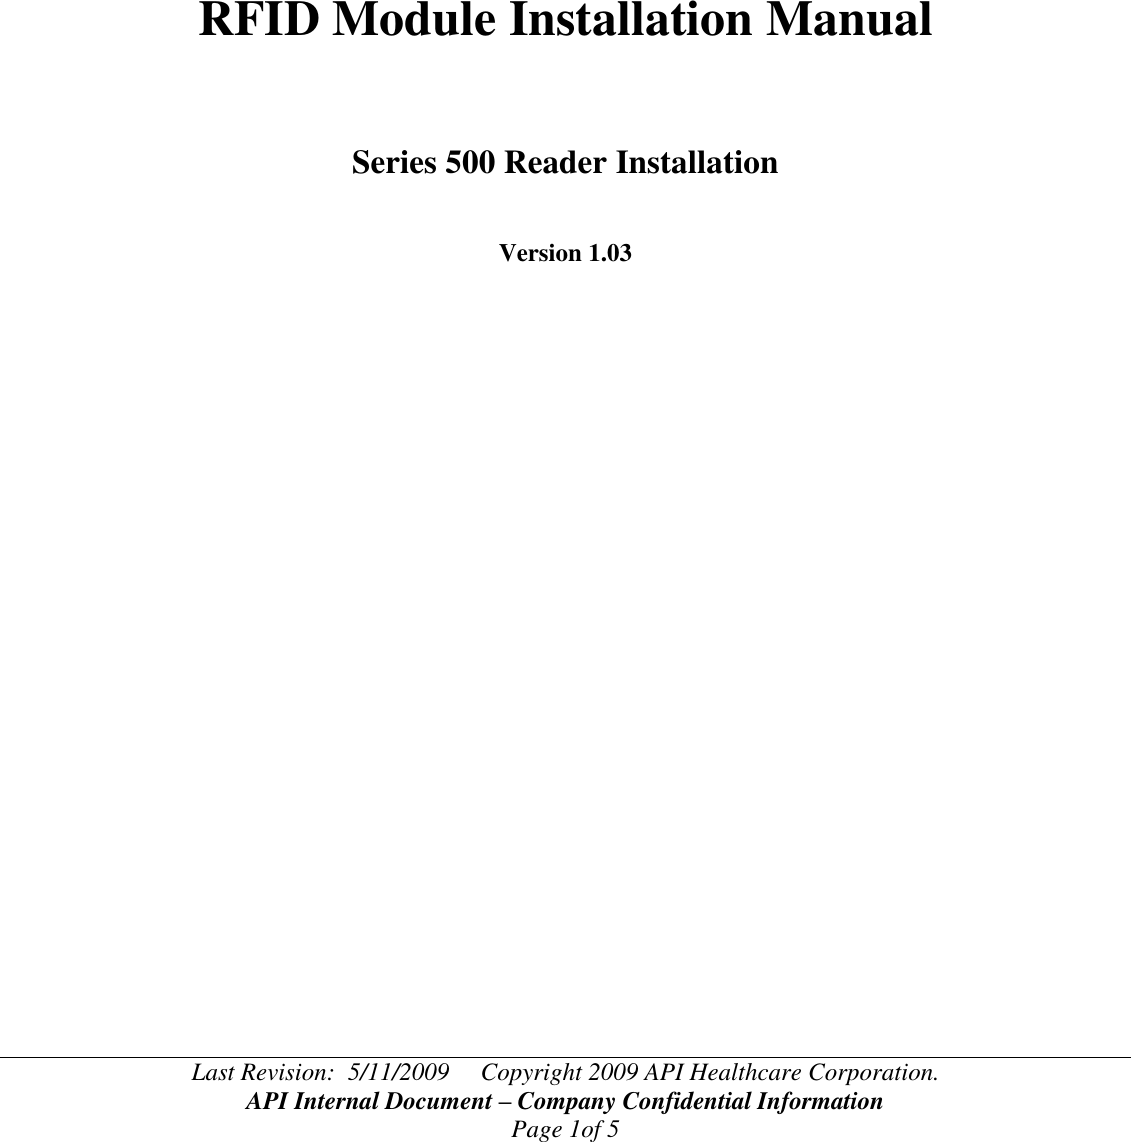 Last Revision:  5/11/2009     Copyright 2009 API Healthcare Corporation. API Internal Document – Company Confidential Information Page 1of 5       RFID Module Installation Manual    Series 500 Reader Installation   Version 1.03          